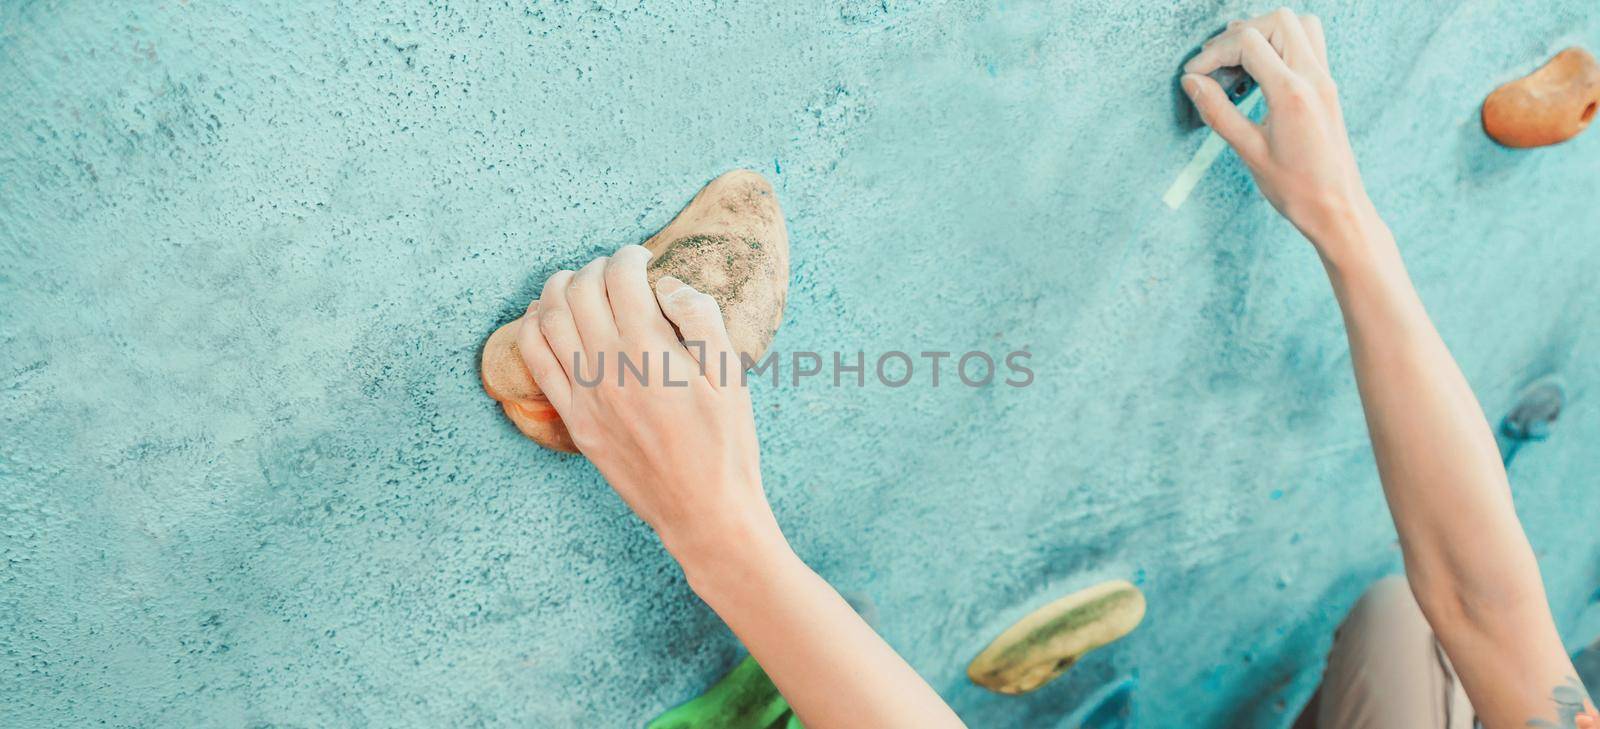 Climber young woman starting bouldering track on artificial wall indoor, view of hands